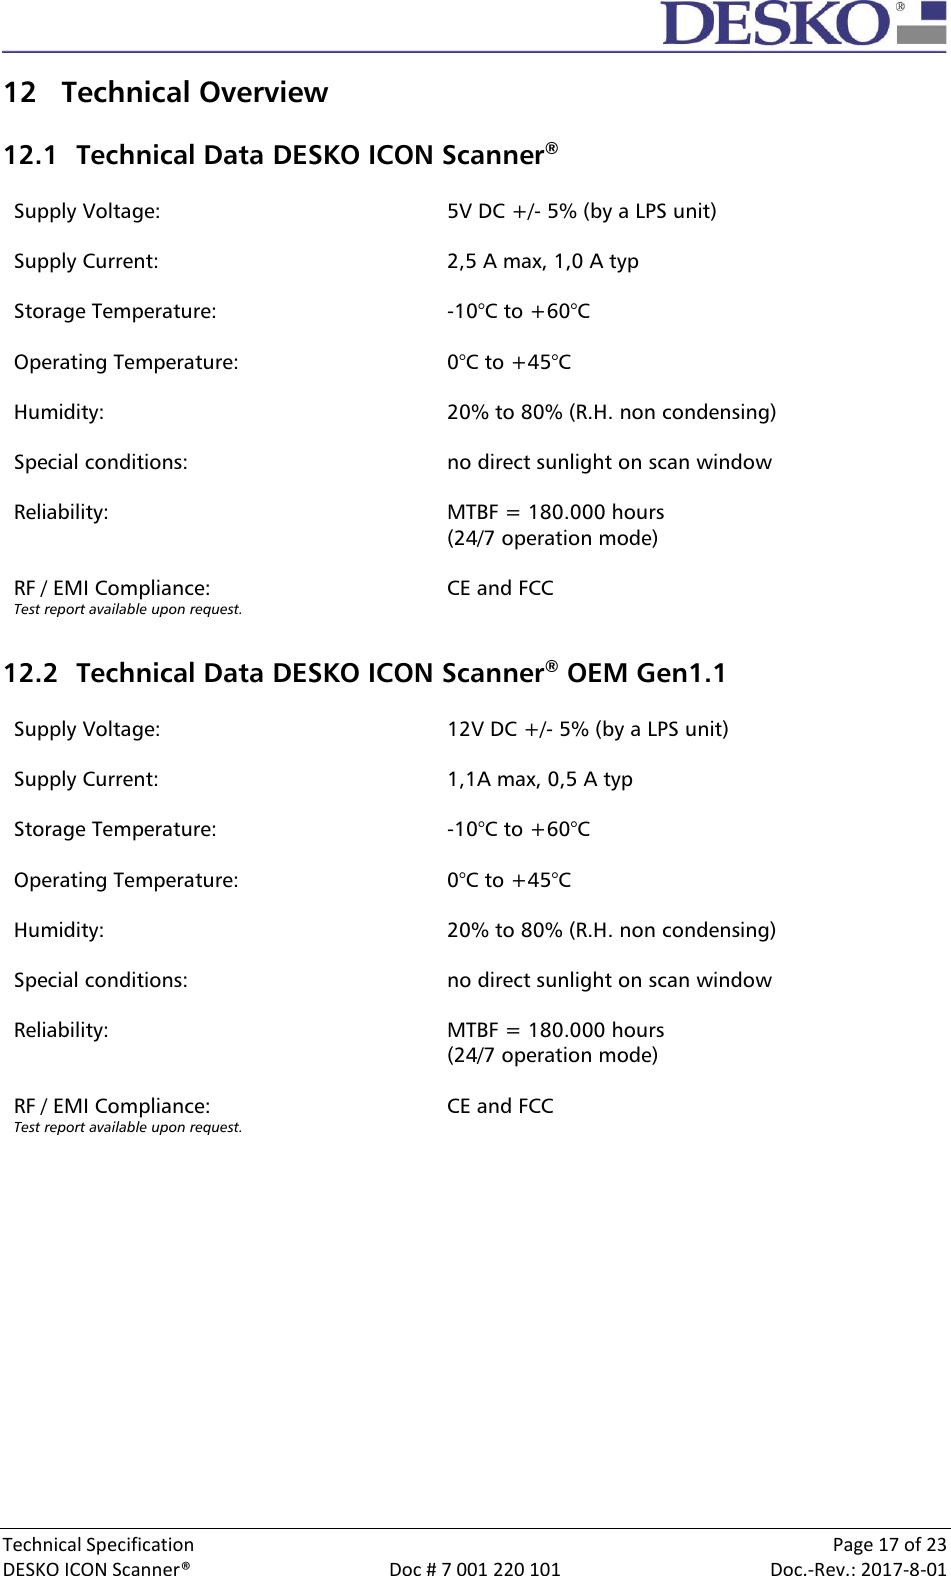  Technical Specification    Page 17 of 23 DESKO ICON Scanner®  Doc # 7 001 220 101  Doc.-Rev.: 2017-8-01  12 Technical Overview  12.1 Technical Data DESKO ICON Scanner®  Supply Voltage: 5V DC +/- 5% (by a LPS unit)  Supply Current: 2,5 A max, 1,0 A typ  Storage Temperature: -10°C to +60°C  Operating Temperature: 0°C to +45°C  Humidity: 20% to 80% (R.H. non condensing)  Special conditions: no direct sunlight on scan window  Reliability: MTBF = 180.000 hours  (24/7 operation mode)  RF / EMI Compliance: Test report available upon request. CE and FCC   12.2 Technical Data DESKO ICON Scanner® OEM Gen1.1  Supply Voltage: 12V DC +/- 5% (by a LPS unit)  Supply Current: 1,1A max, 0,5 A typ  Storage Temperature: -10°C to +60°C  Operating Temperature: 0°C to +45°C  Humidity: 20% to 80% (R.H. non condensing)  Special conditions: no direct sunlight on scan window  Reliability: MTBF = 180.000 hours  (24/7 operation mode)  RF / EMI Compliance: Test report available upon request. CE and FCC      